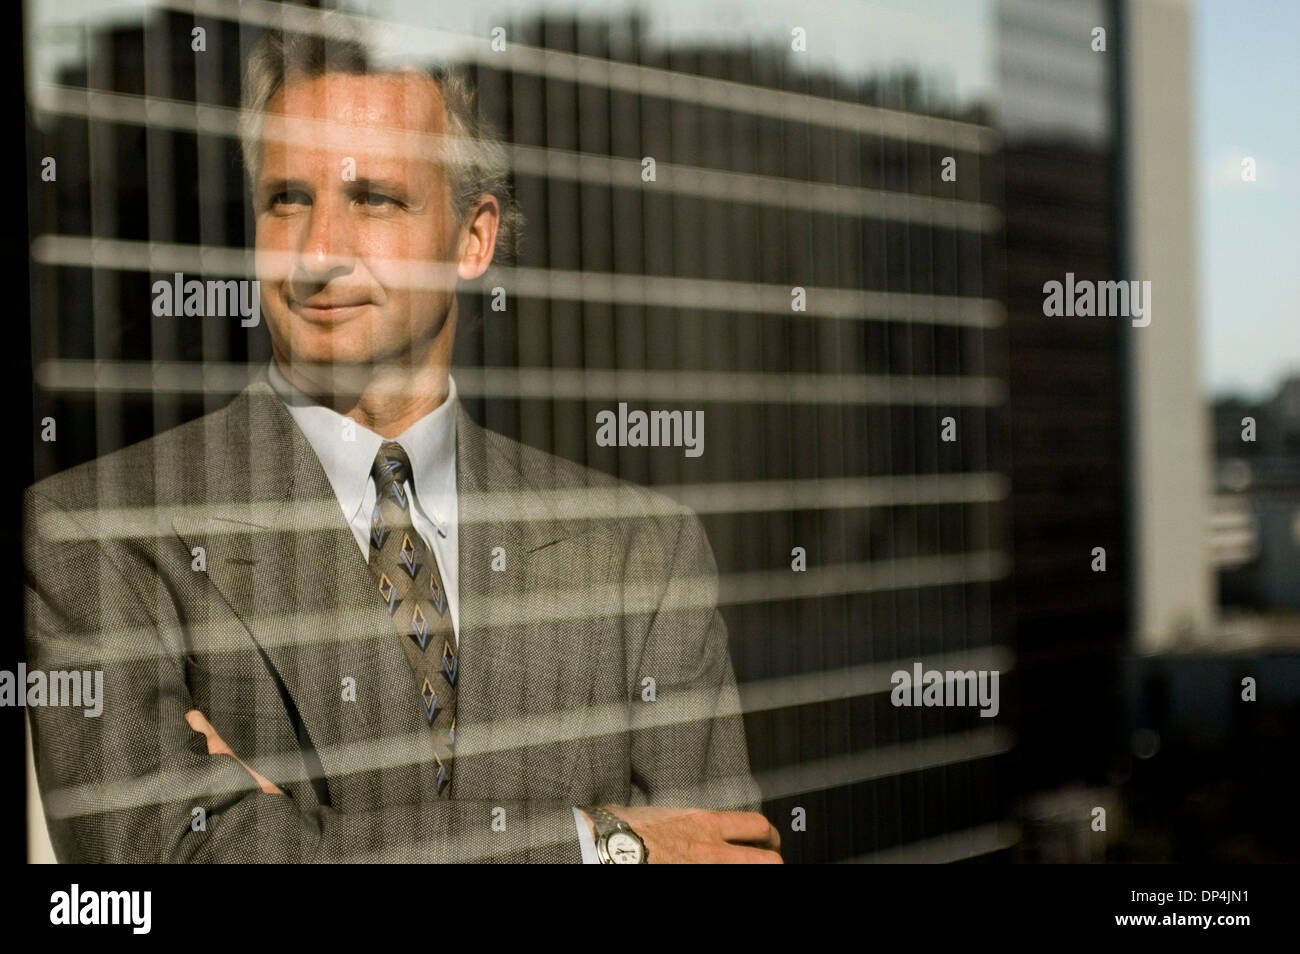 Aug 15, 2006; San Diego, CA, USA; STEVEN GEYER in the principal engineer for Tetra Tech, Inc, an environmental, homeland security, resource management and infastructure consutling firm. File photo dated on Feb. 15, 2006. Mandatory Credit: Photo by Kat Woronowicz/ZUMA Press. (©) Copyright 2006 by Kat Woronowicz Stock Photo